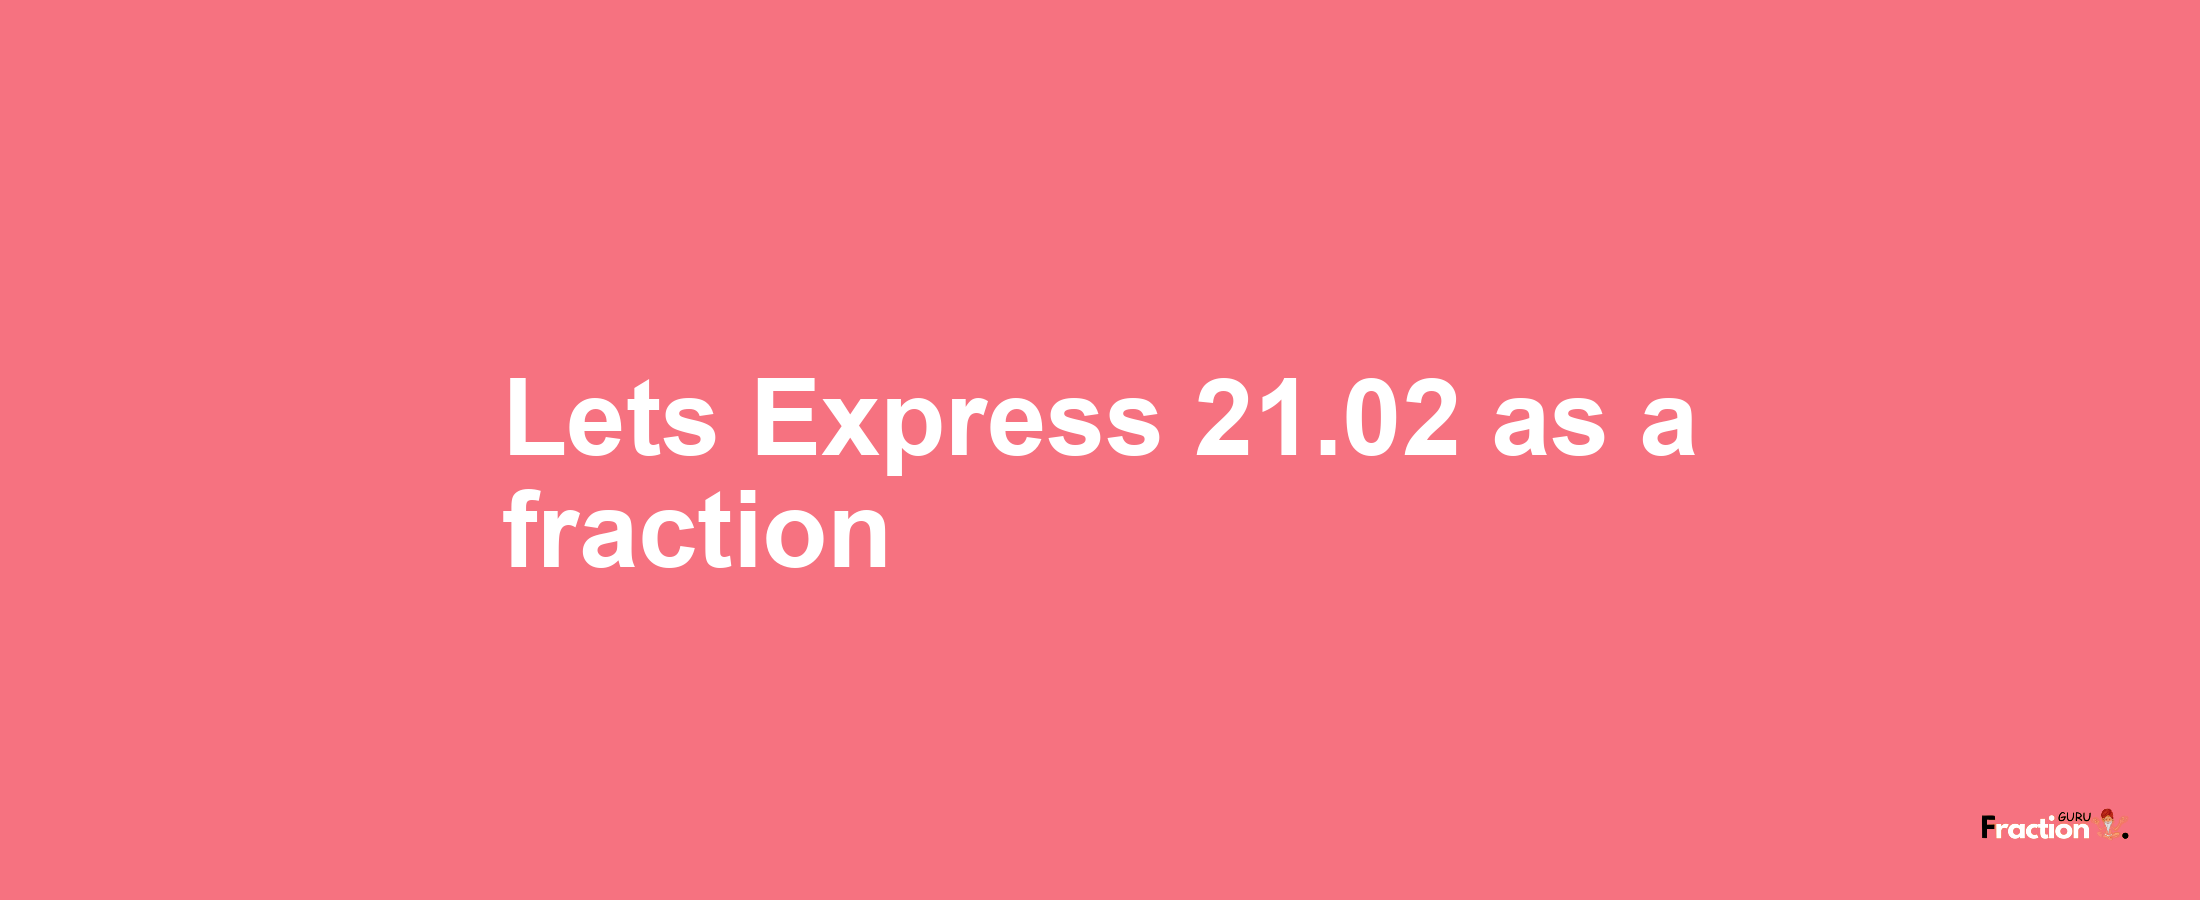 Lets Express 21.02 as afraction